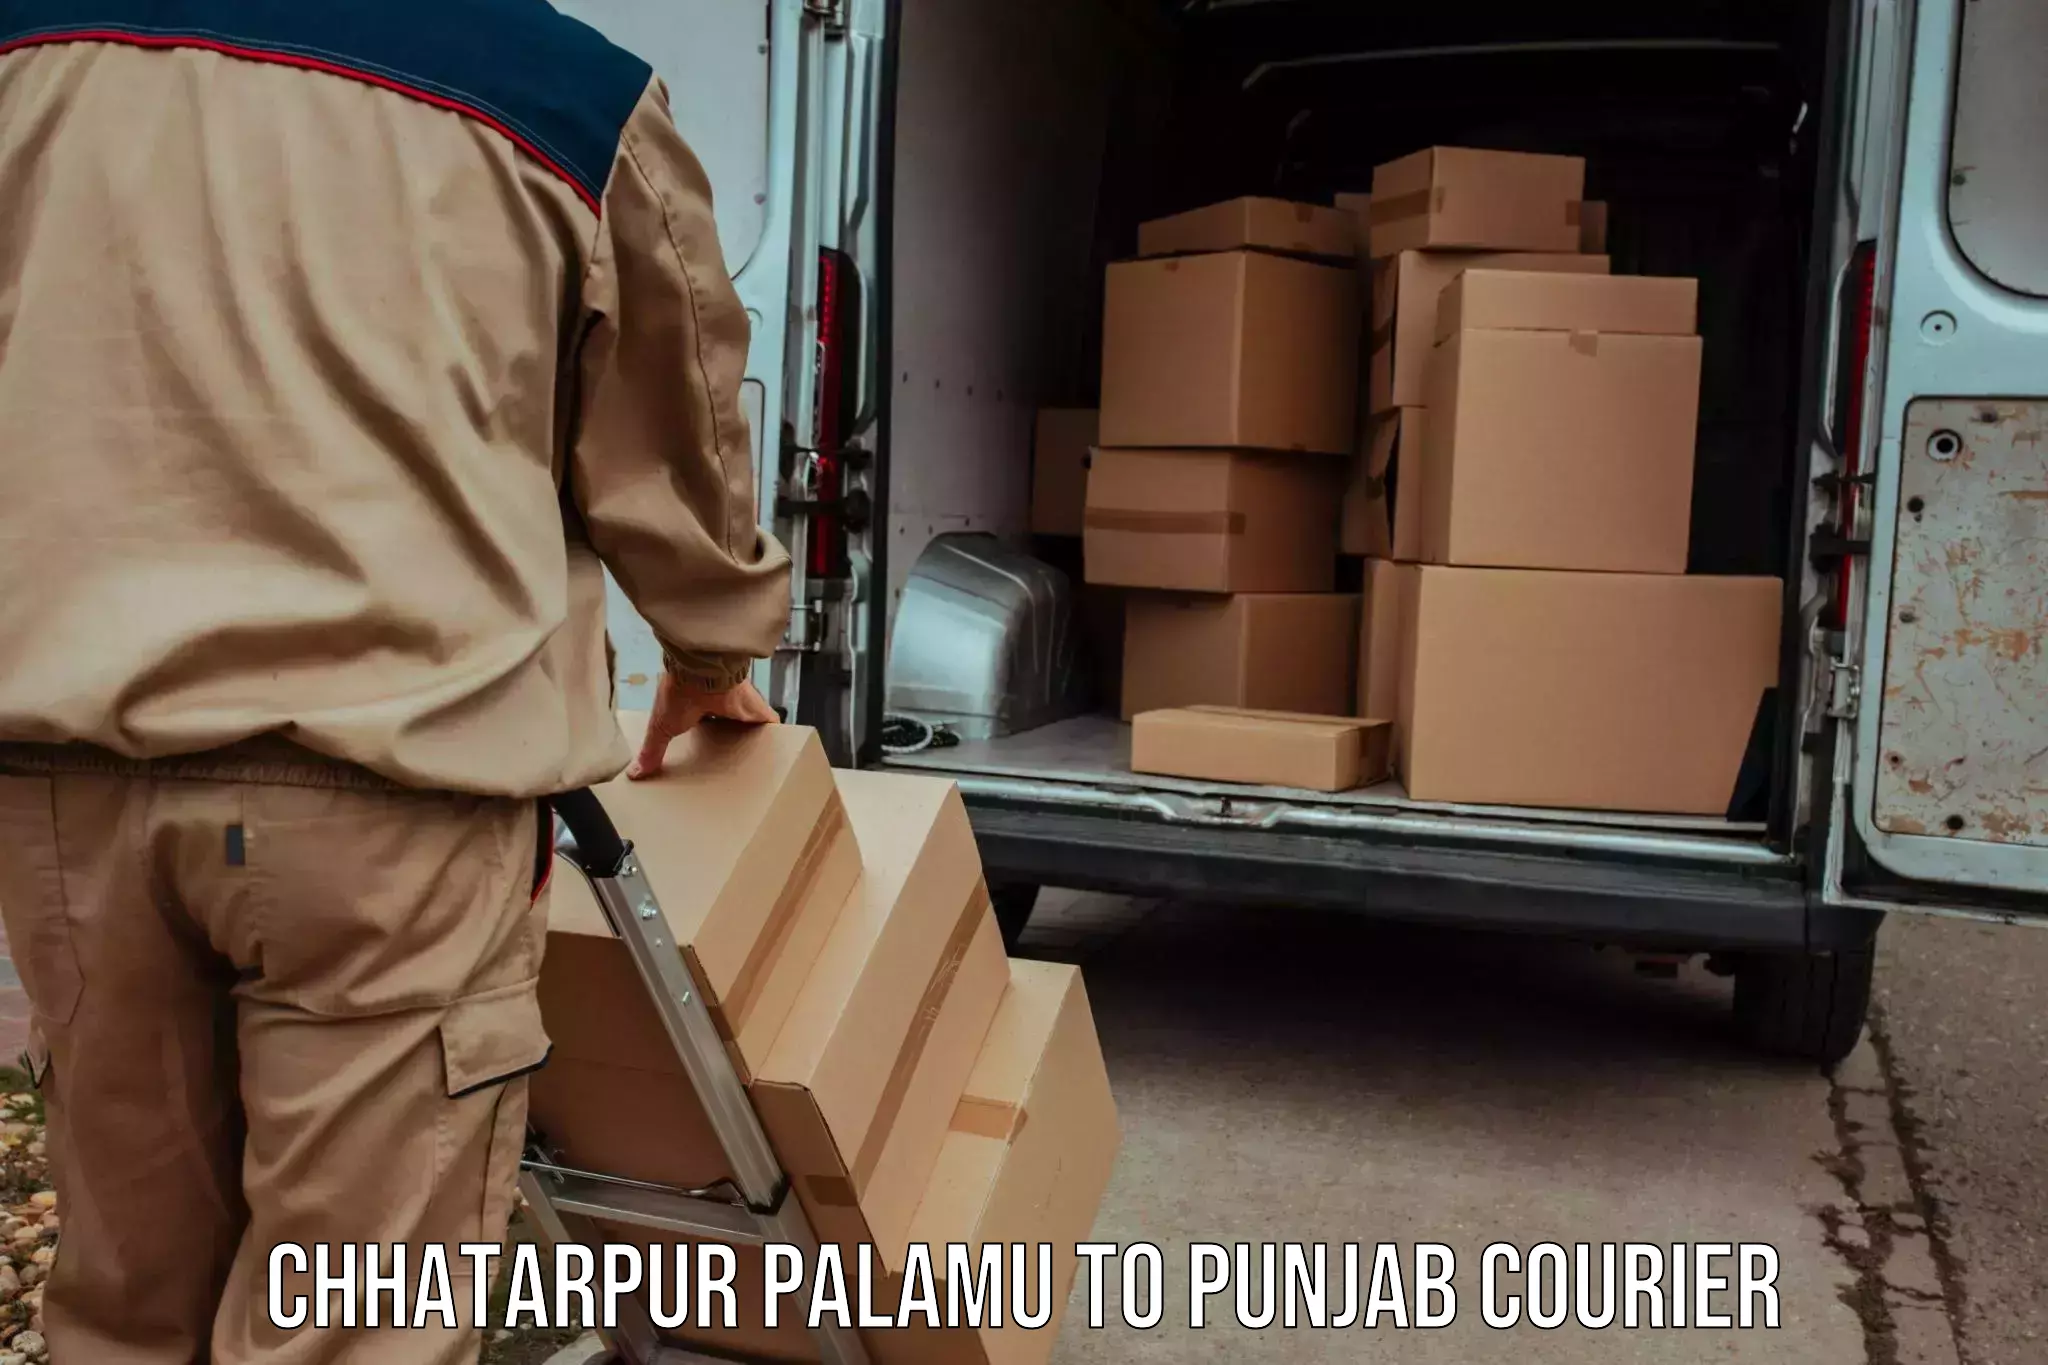 Easy access courier services Chhatarpur Palamu to Central University of Punjab Bathinda